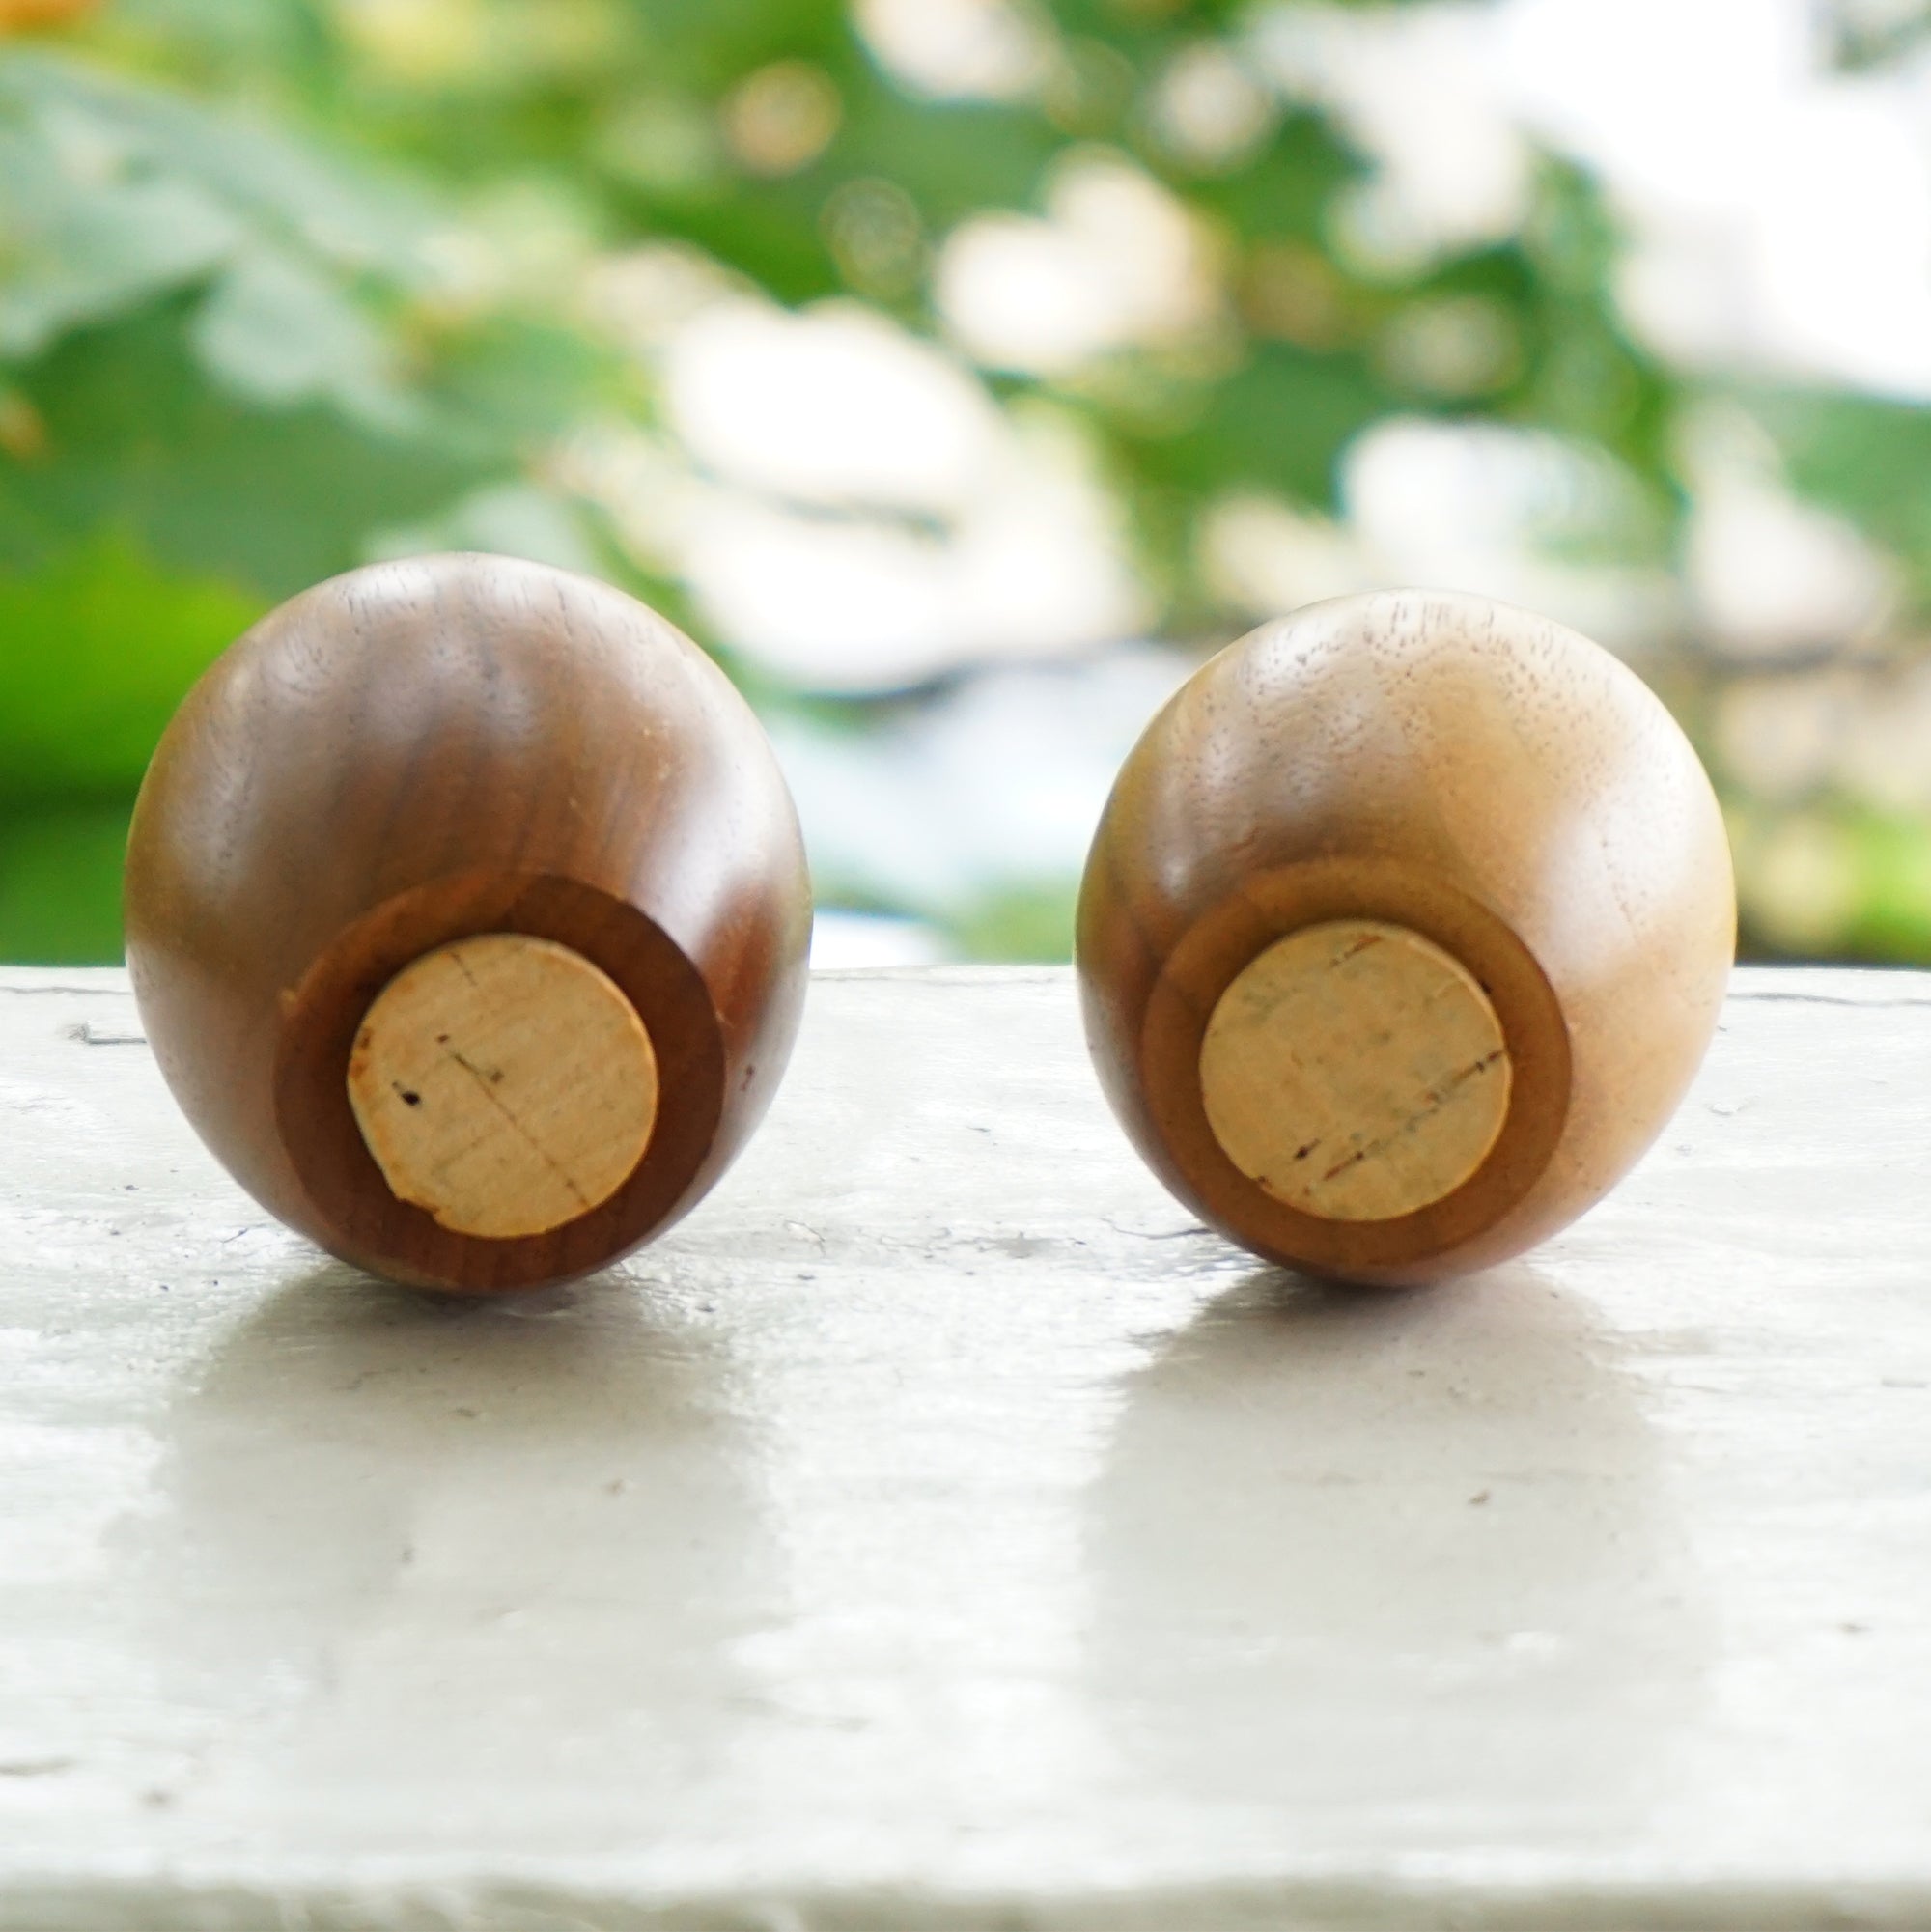 Vintage Wooden Apple Salt and Pepper Shakers. Made in Portugal.